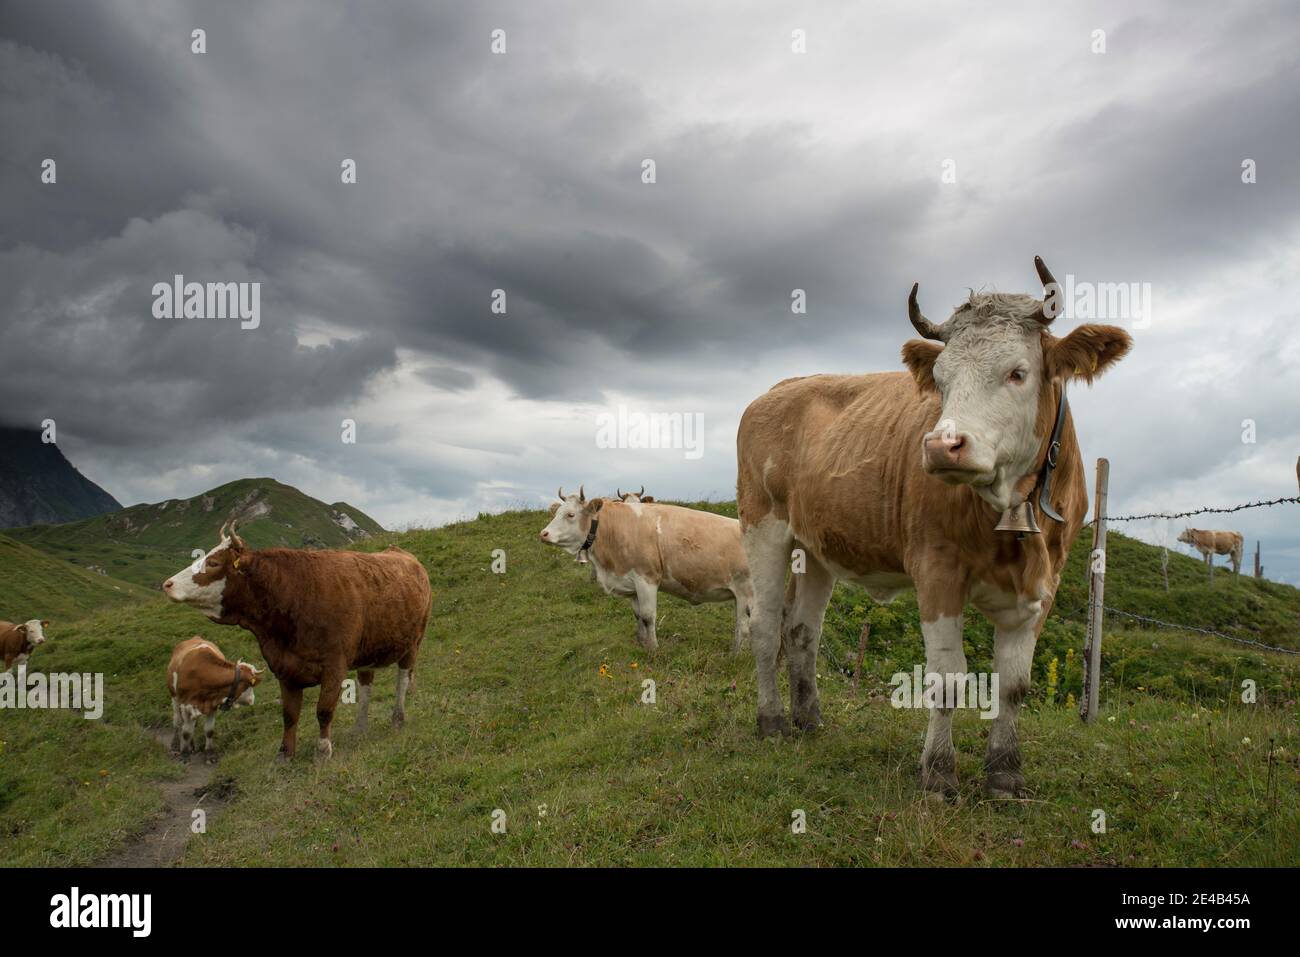 Alpine meadow with cows in rainy weather Stock Photo